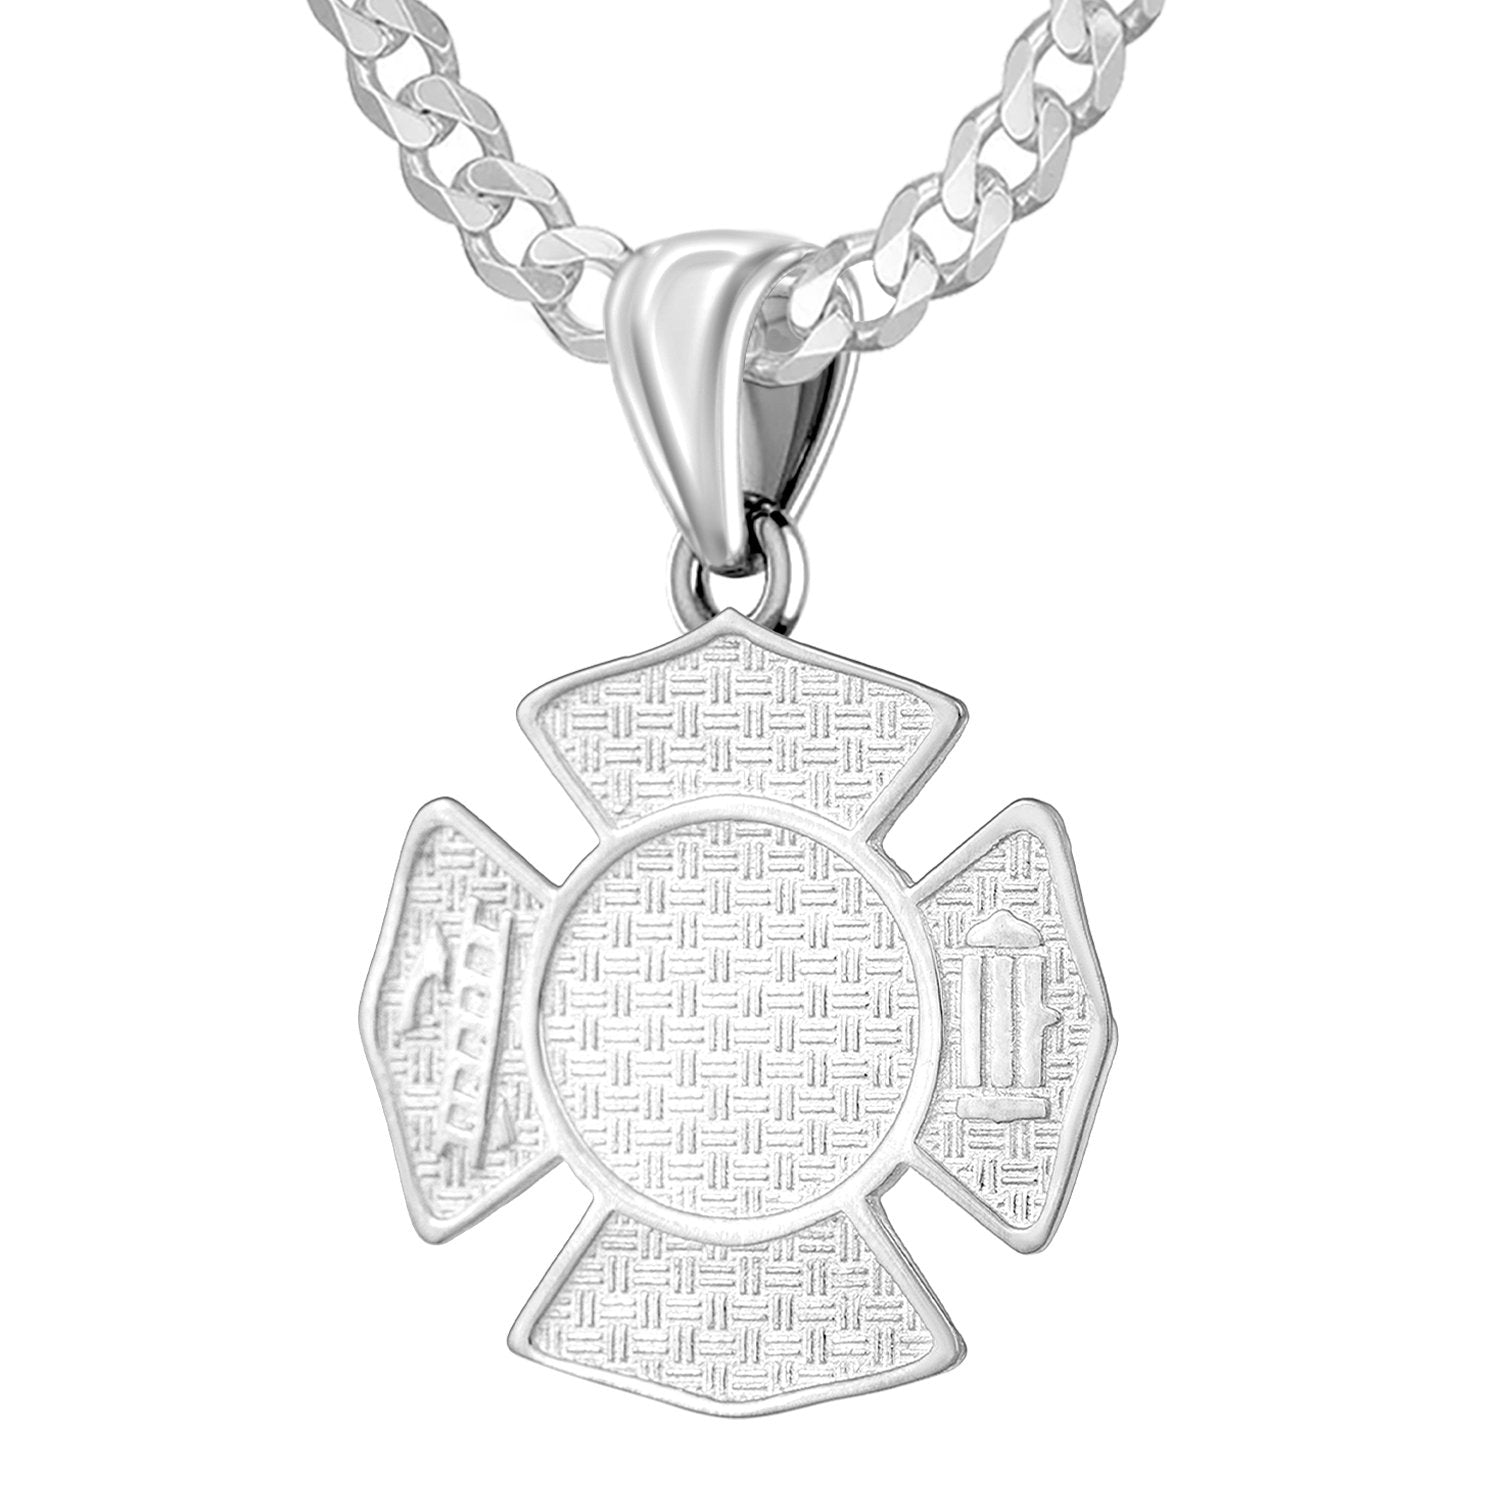 Firefighter Pendant of 26mm Length - 2.8mm Curb Chain